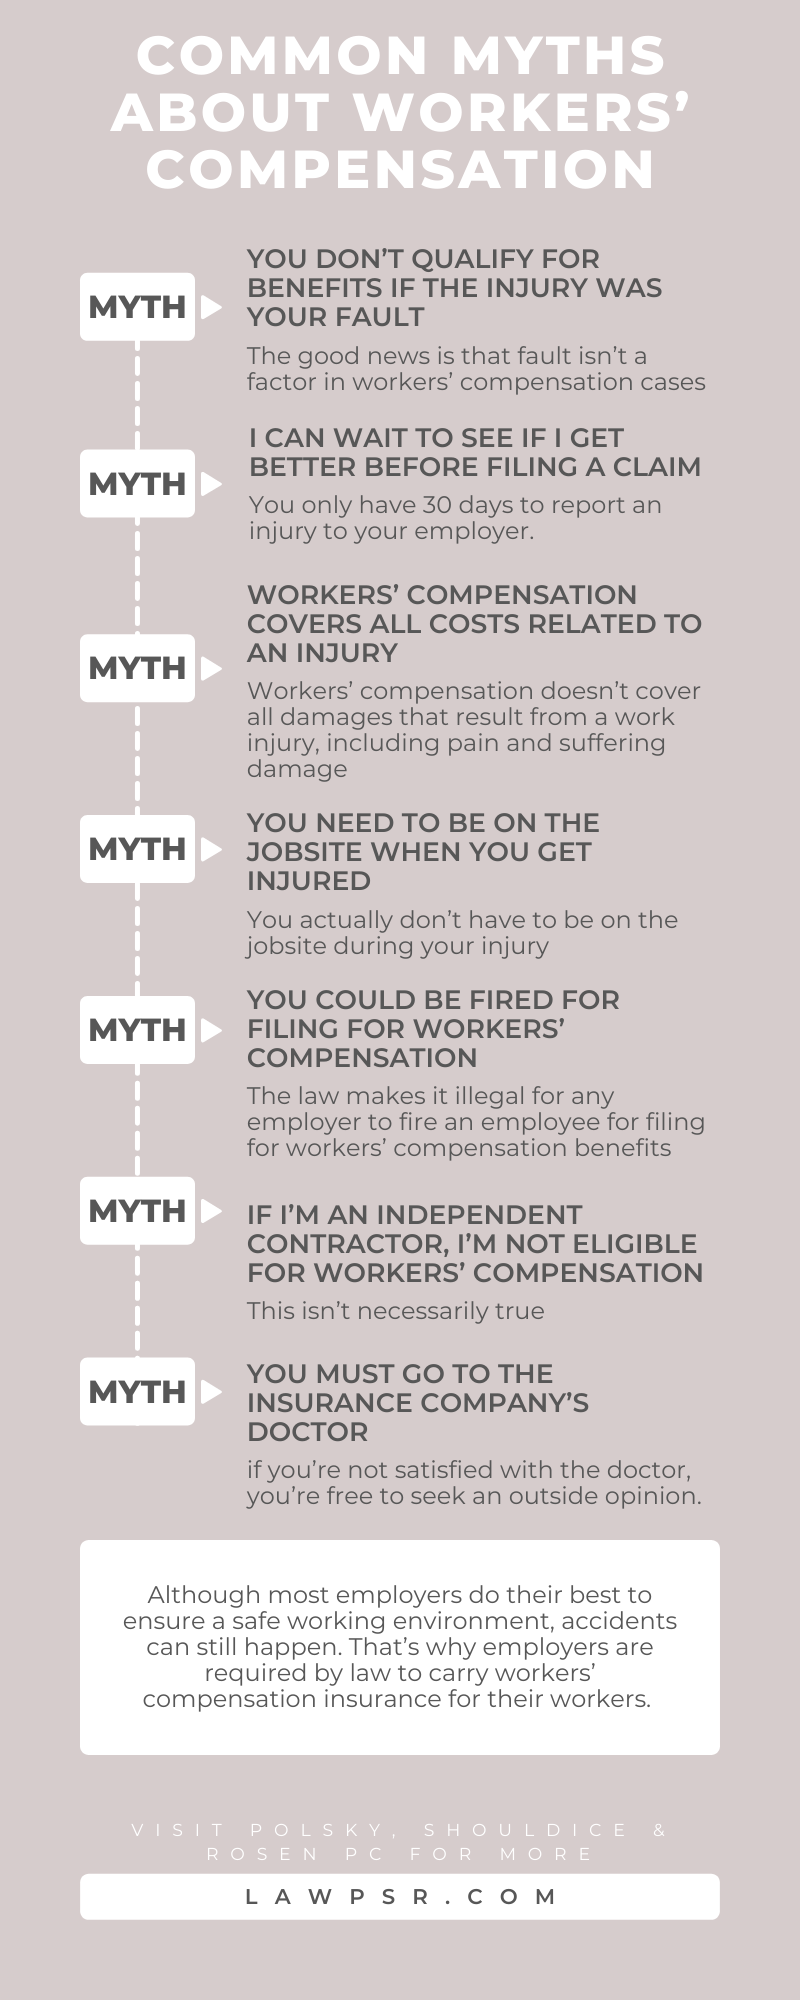 Common Myths About Workers’ Compensation Infographic